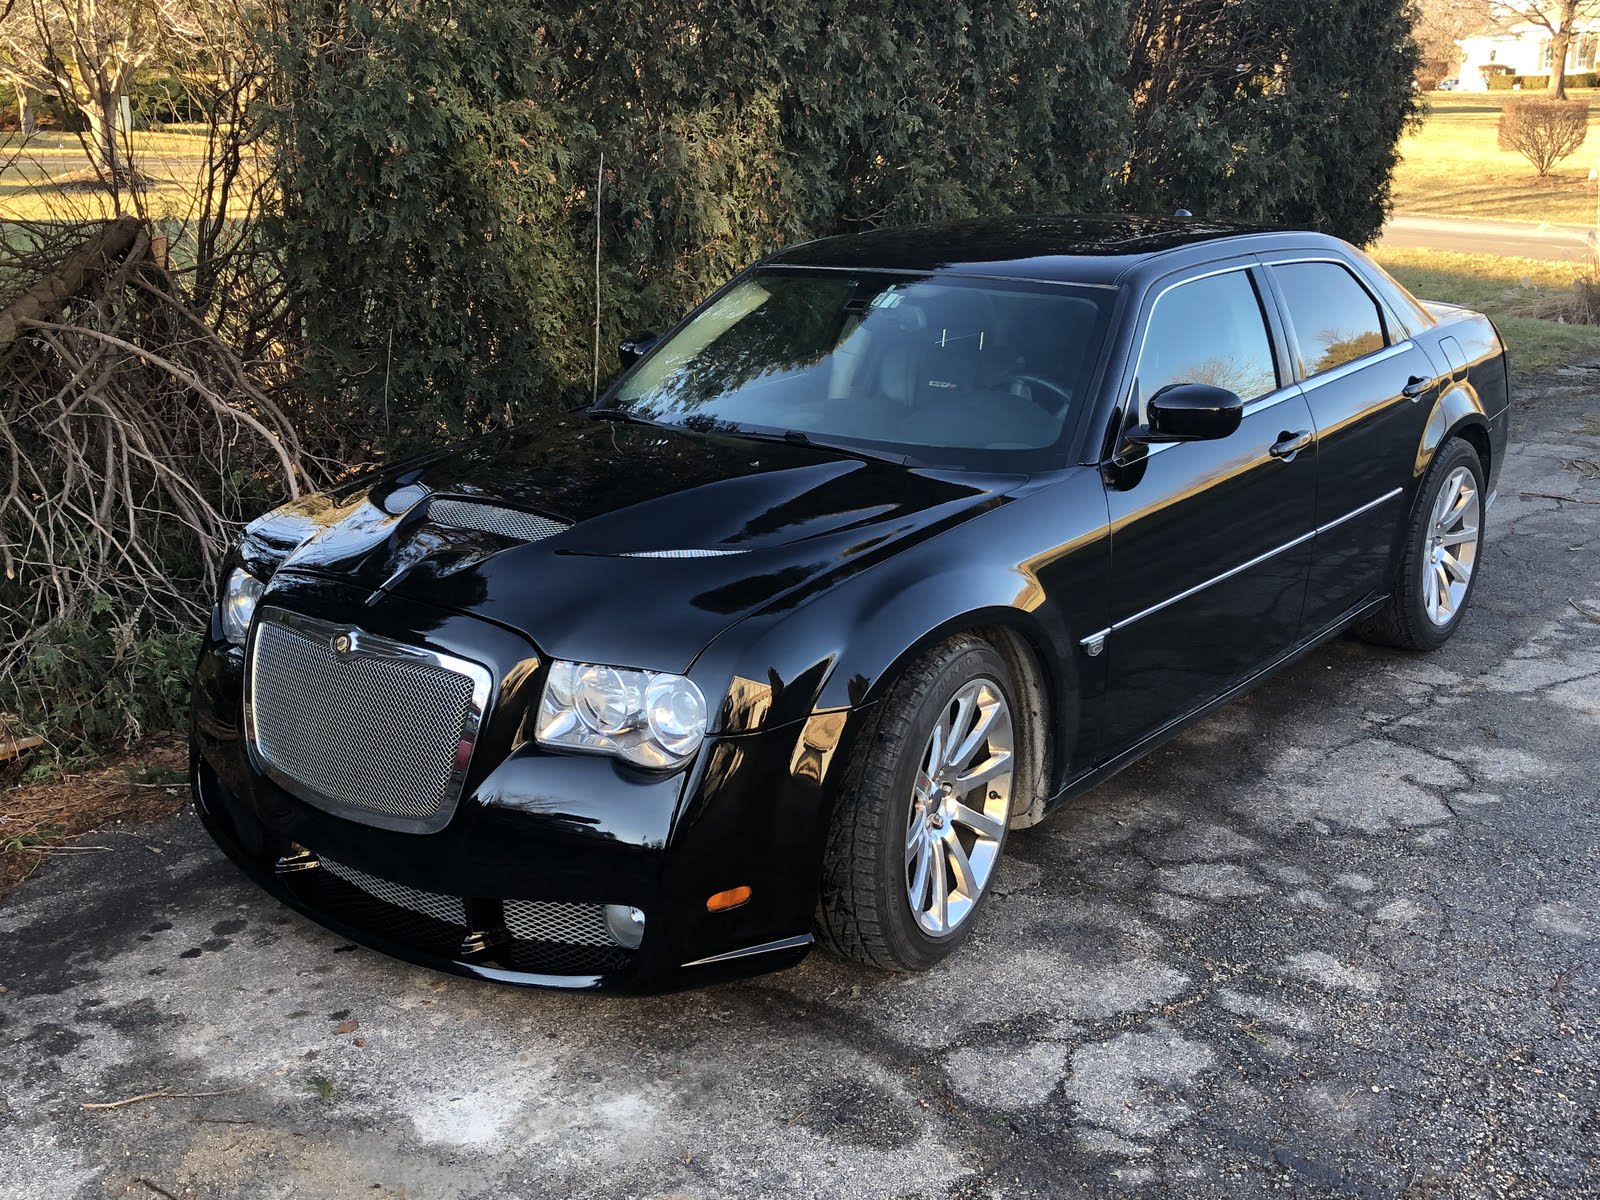 Chrysler 300 Questions - is there a kit for the old body chrysler 300 front  end to make it look... - CarGurus